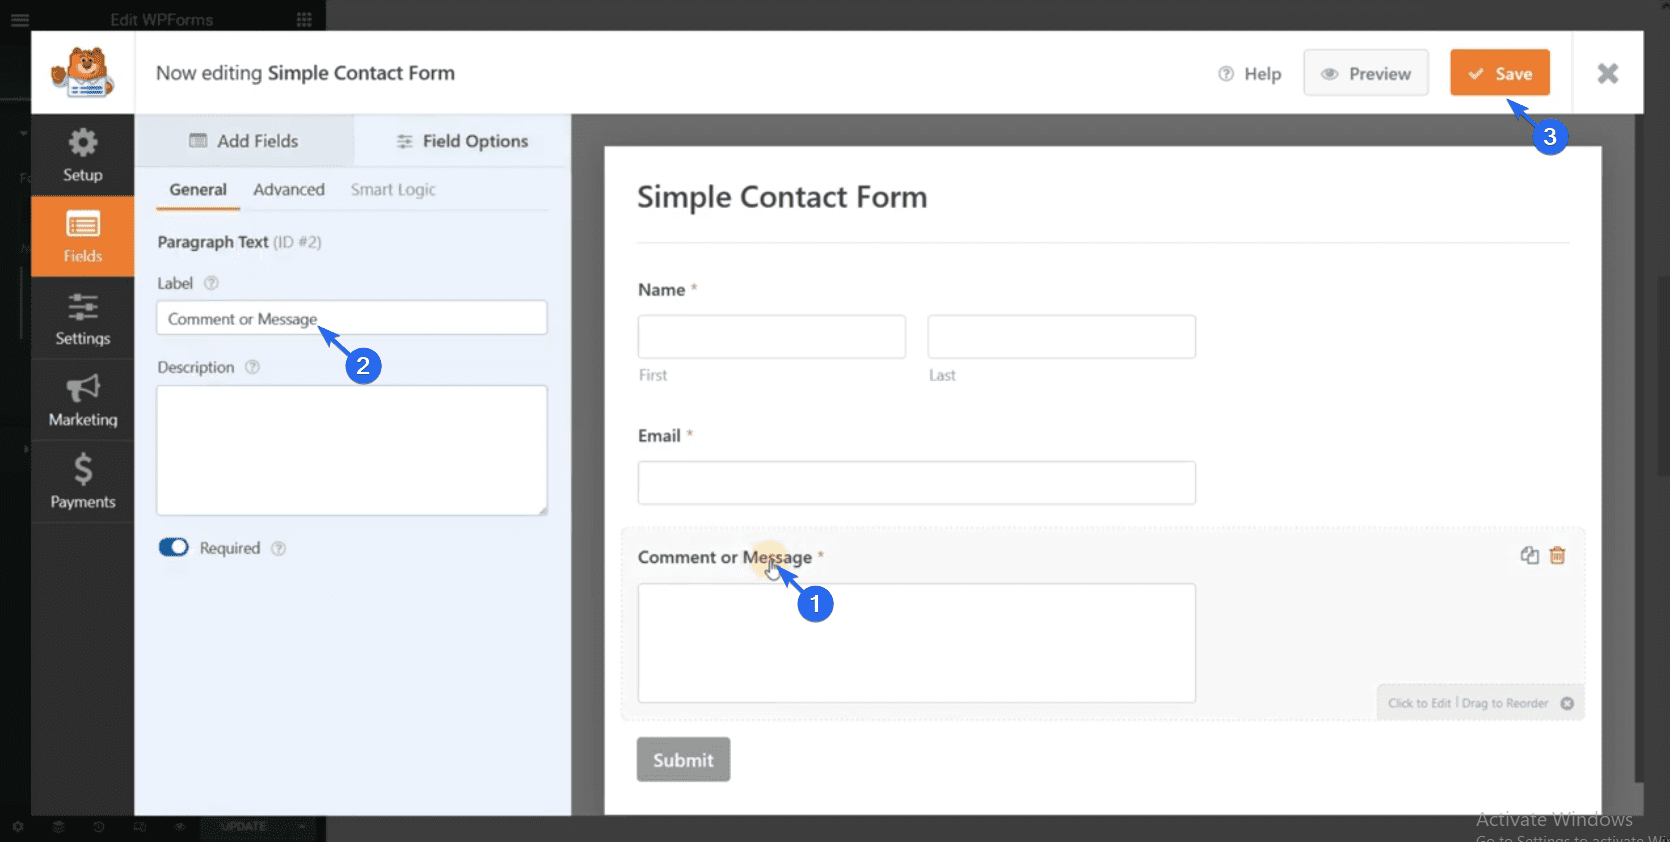 Configure your contact form and save